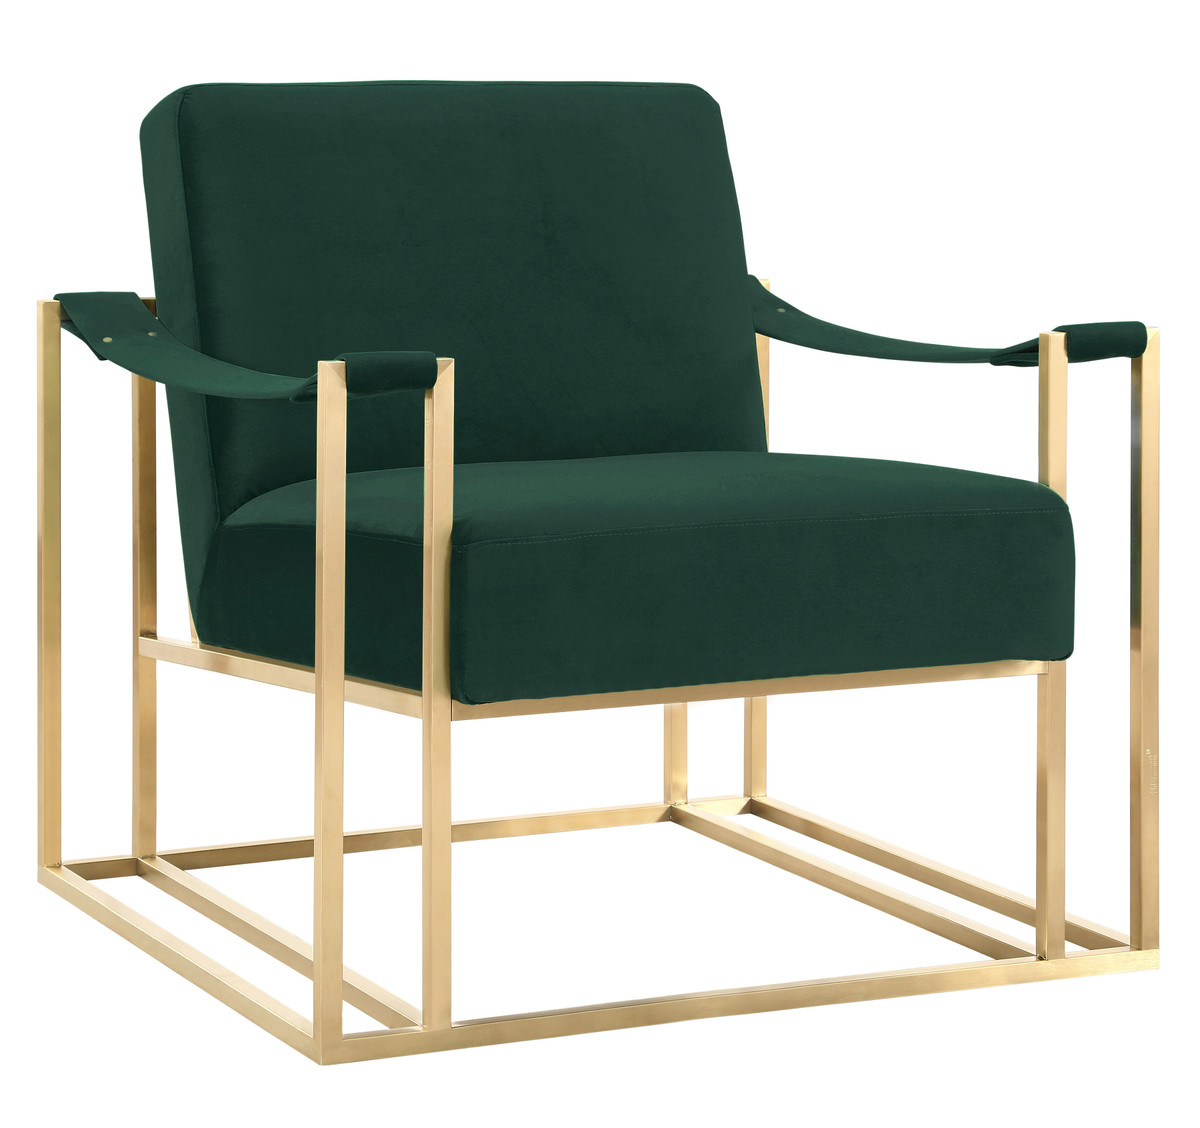 Tov-as82 Baxter Velvet Chair, Forest Green - 31 X 31.1 X 33.7 In.